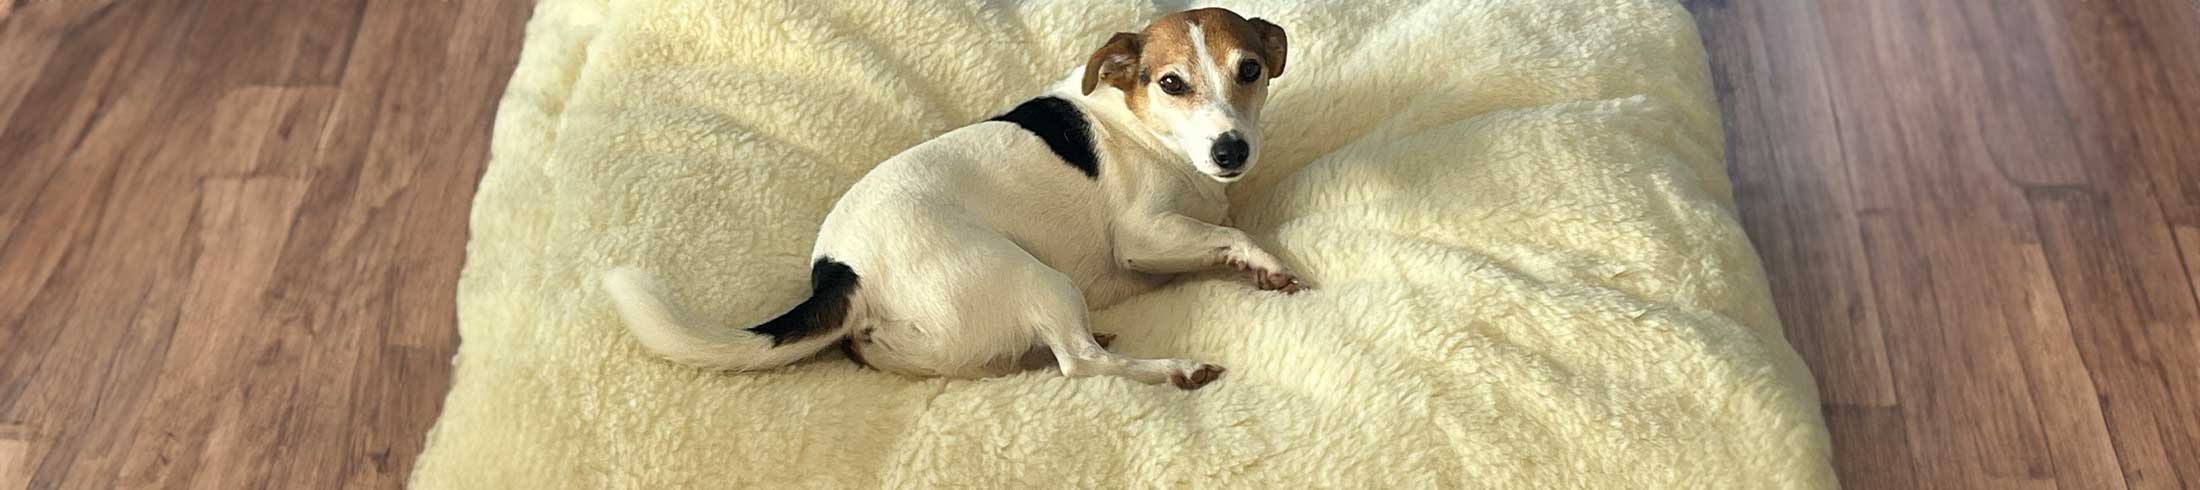 Spacious and luxurious wool dog bed in natural white, providing ample room for your dog to stretch and relax.